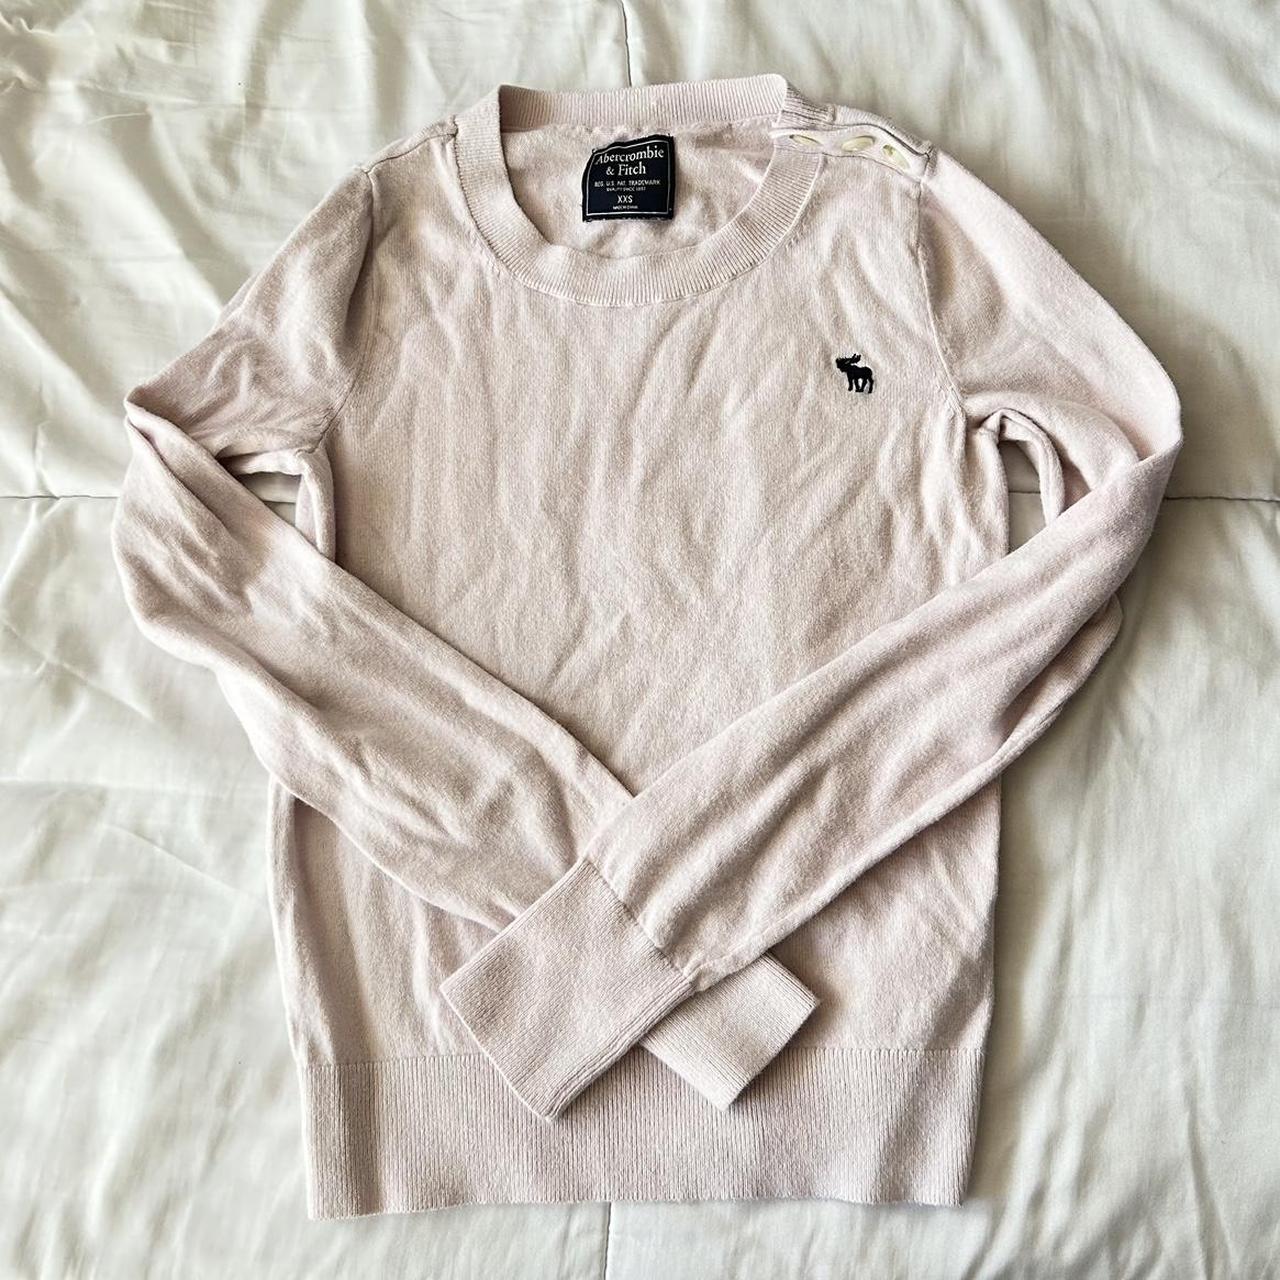 Abercrombie & Fitch Women's Pink Shirt